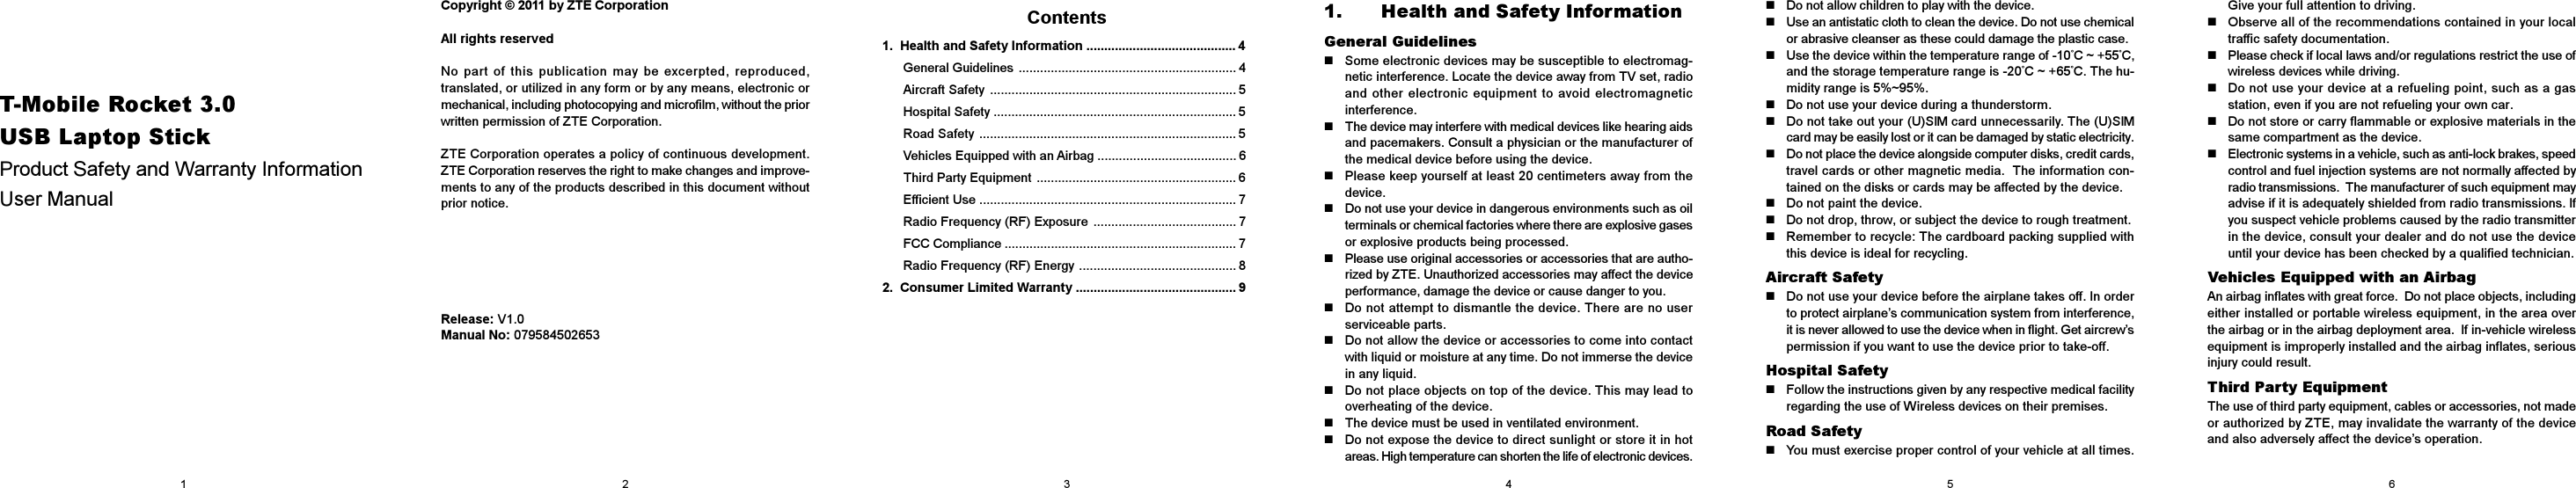 1. Health and Safety Information General GuidelinesSome electronic devices may be susceptible to electromag-netic interference. Locate the device away from TV set, radioand other electronic equipment to avoid electromagneticinterference.The device may interfere with medical devices like hearing aidsand pacemakers. Consult a physician or the manufacturer ofthe medical device before using the device.Please keep yourself at least 20 centimeters away from thedevice.Do not use your device in dangerous environments such as oilterminals or chemical factories where there are explosive gasesor explosive products being processed.Please use original accessories or accessories that are autho-rized by ZTE. Unauthorized accessories may affect the deviceperformance, damage the device or cause danger to you.Do not attempt to dismantle the device. There are no userserviceable parts.Do not allow the device or accessories to come into contactwith liquid or moisture at any time. Do not immerse the devicein any liquid.Do not place objects on top of the device. This may lead tooverheating of the device.The device must be used in ventilated environment.Do not expose the device to direct sunlight or store it in hotareas. High temperature can shorten the life of electronic devices.T-Mobile Rocket 3.0USB Laptop StickProduct Safety and Warranty InformationUser ManualCopyright © 2011 by ZTE CorporationAll rights reservedNo part of this publication may be excerpted, reproduced,translated, or utilized in any form or by any means, electronic ormechanical, including photocopying and microfilm, without the priorwritten permission of ZTE Corporation.ZTE Corporation operates a policy of continuous development.ZTE Corporation reserves the right to make changes and improve-ments to any of the products described in this document withoutprior notice.Release: V1.0Manual No: 079584502653Contents1.  Health and Safety Information .......................................... 4General Guidelines ............................................................. 4Aircraft Safety ..................................................................... 5Hospital Safety .................................................................... 5Road Safety ........................................................................ 5Vehicles Equipped with an Airbag ....................................... 6Third Party Equipment ........................................................ 6Efficient Use ........................................................................ 7Radio Frequency (RF) Exposure ........................................ 7FCC Compliance ................................................................. 7Radio Frequency (RF) Energy ............................................ 82.  Consumer Limited Warranty ............................................. 9Do not allow children to play with the device.Use an antistatic cloth to clean the device. Do not use chemicalor abrasive cleanser as these could damage the plastic case.Use the device within the temperature range of -10°C ~ +55°C,and the storage temperature range is -20°C ~ +65°C. The hu-midity range is 5%~95%.Do not use your device during a thunderstorm.Do not take out your (U)SIM card unnecessarily. The (U)SIMcard may be easily lost or it can be damaged by static electricity.Do not place the device alongside computer disks, credit cards,travel cards or other magnetic media.  The information con-tained on the disks or cards may be affected by the device.Do not paint the device.Do not drop, throw, or subject the device to rough treatment.Remember to recycle: The cardboard packing supplied withthis device is ideal for recycling.Aircraft SafetyDo not use your device before the airplane takes off. In orderto protect airplane’s communication system from interference,it is never allowed to use the device when in flight. Get aircrew’spermission if you want to use the device prior to take-off.Hospital SafetyFollow the instructions given by any respective medical facilityregarding the use of Wireless devices on their premises.Road SafetyYou must exercise proper control of your vehicle at all times.Give your full attention to driving.Observe all of the recommendations contained in your localtraffic safety documentation.Please check if local laws and/or regulations restrict the use ofwireless devices while driving.Do not use your device at a refueling point, such as a gasstation, even if you are not refueling your own car.Do not store or carry flammable or explosive materials in thesame compartment as the device.Electronic systems in a vehicle, such as anti-lock brakes, speedcontrol and fuel injection systems are not normally affected byradio transmissions.  The manufacturer of such equipment mayadvise if it is adequately shielded from radio transmissions. Ifyou suspect vehicle problems caused by the radio transmitterin the device, consult your dealer and do not use the deviceuntil your device has been checked by a qualified technician.Vehicles Equipped with an AirbagAn airbag inflates with great force.  Do not place objects, includingeither installed or portable wireless equipment, in the area overthe airbag or in the airbag deployment area.  If in-vehicle wirelessequipment is improperly installed and the airbag inflates, seriousinjury could result.Third Party EquipmentThe use of third party equipment, cables or accessories, not madeor authorized by ZTE, may invalidate the warranty of the deviceand also adversely affect the device’s operation.123456